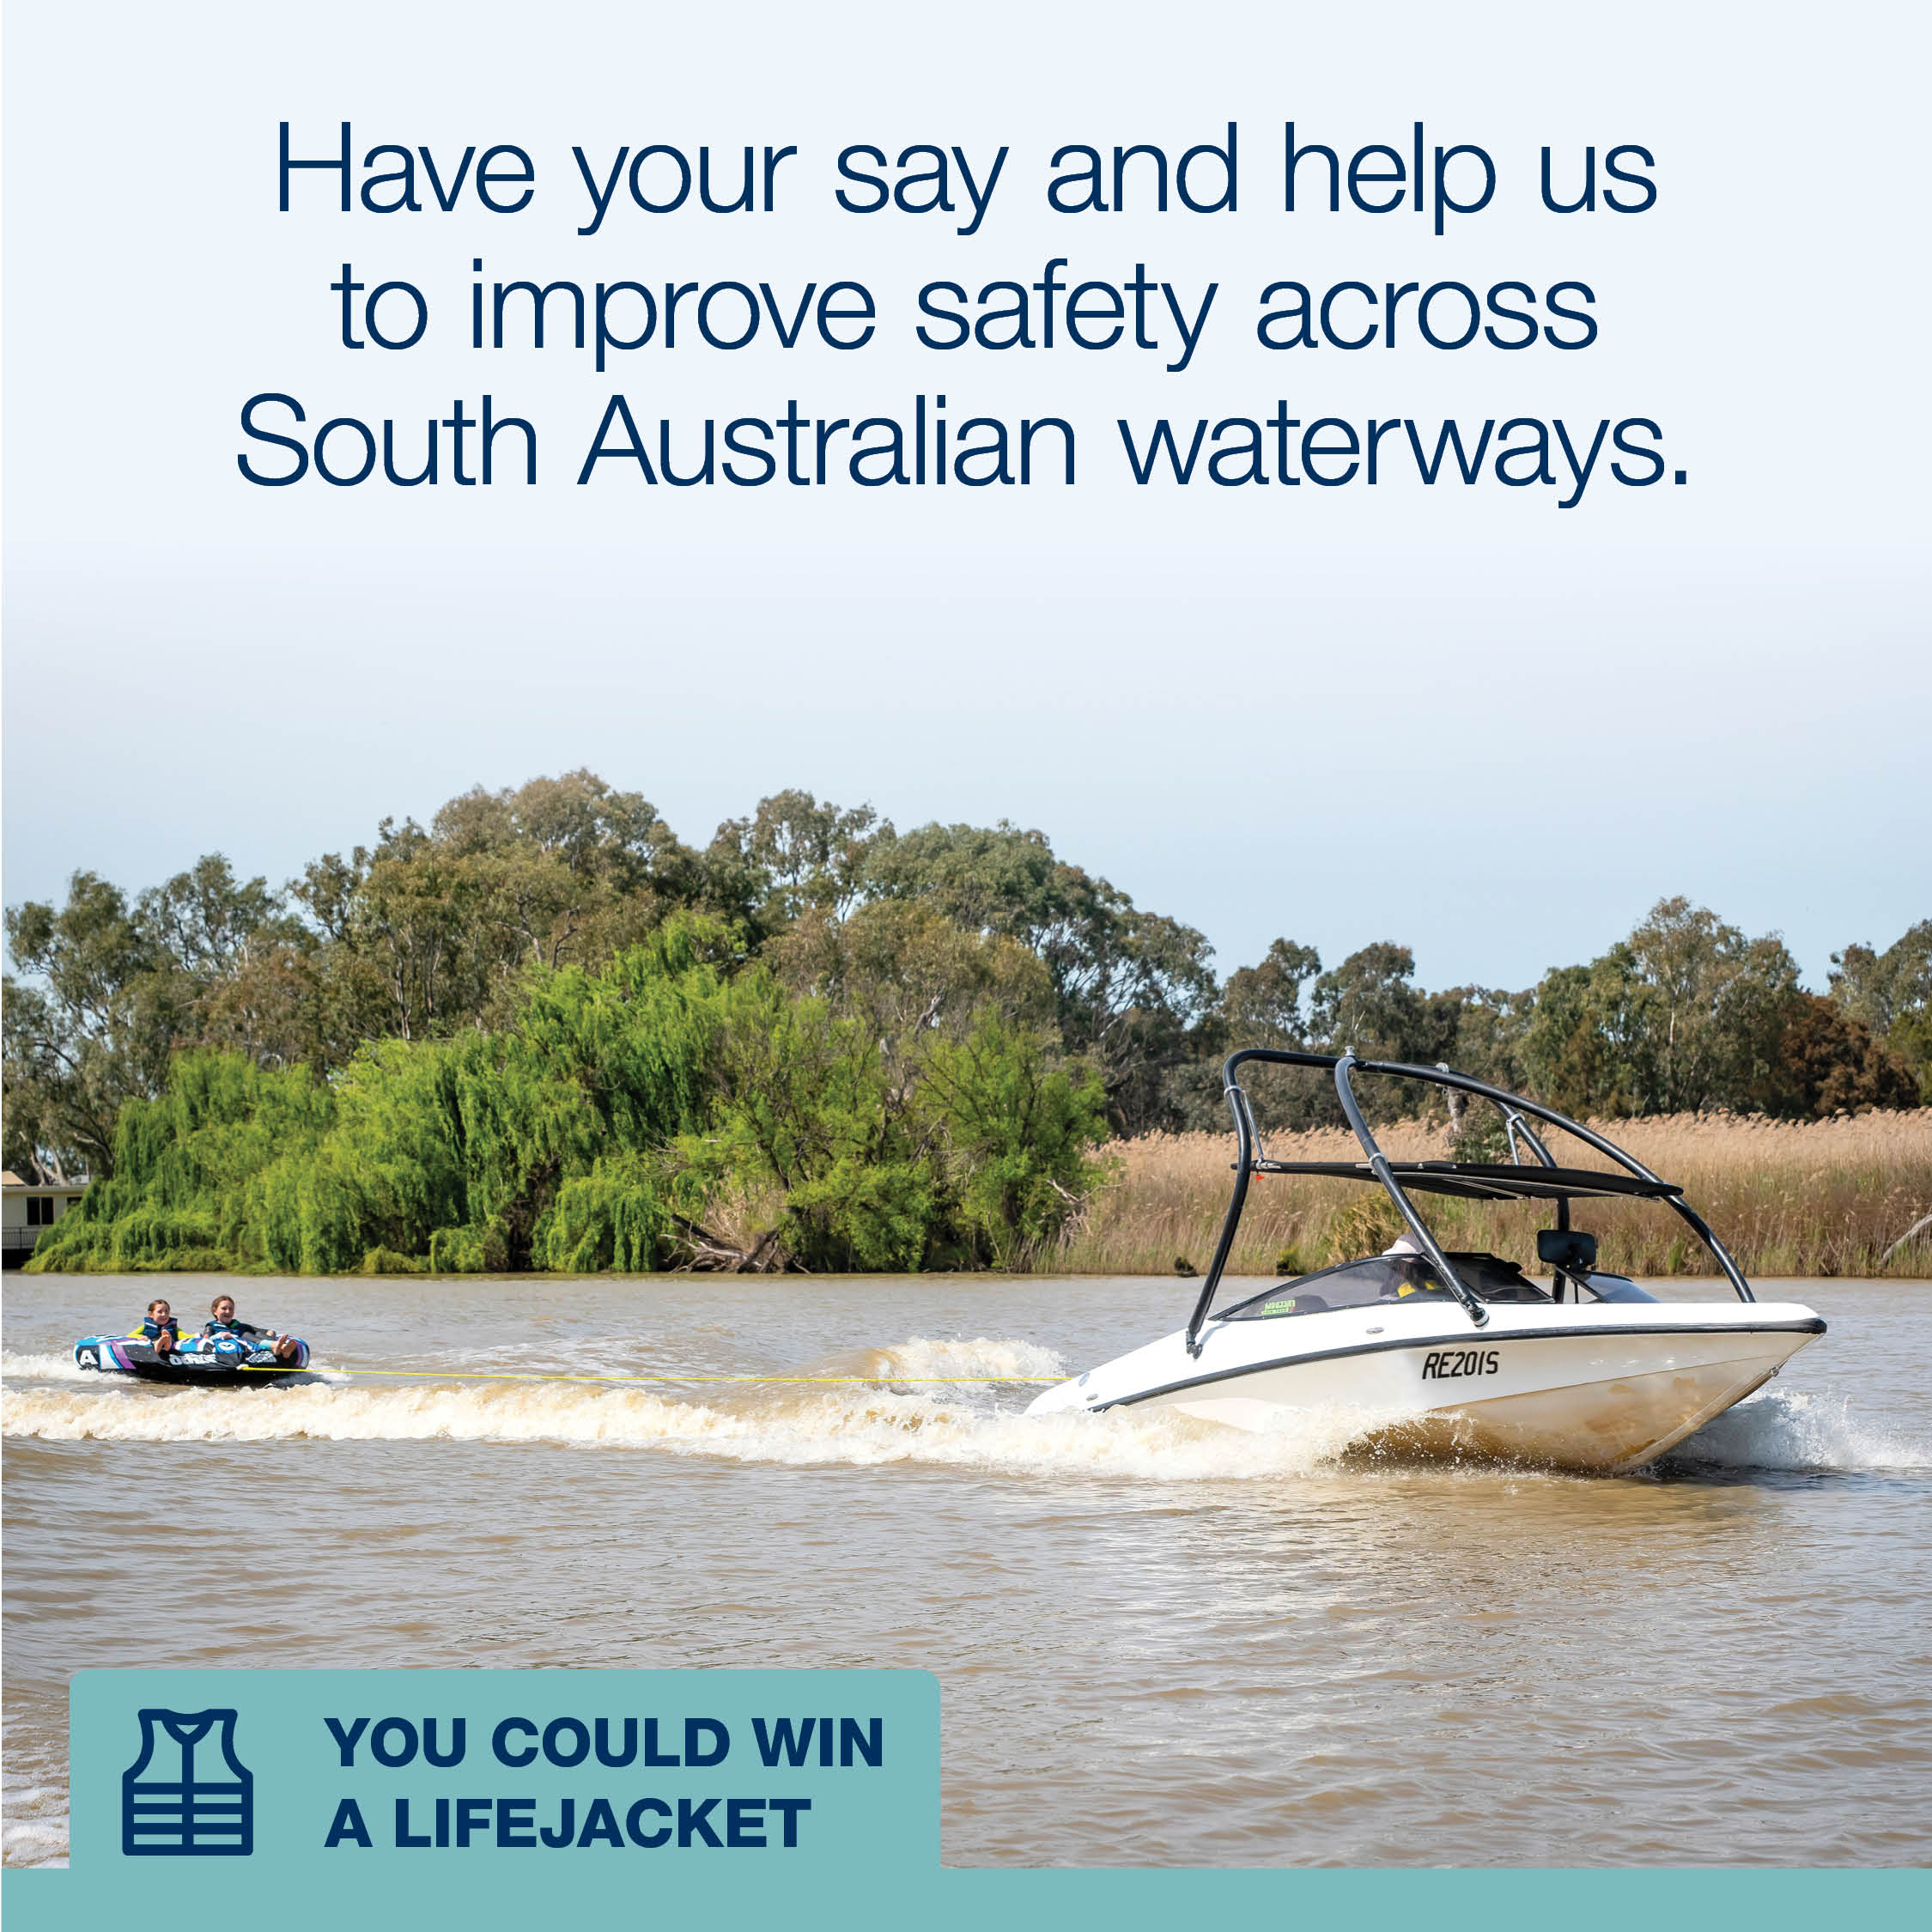 ski boat towing children on a tube on the river and a promotional words to ahve your say to help us improve safety across SA waterways and the chance to win a lifejacket